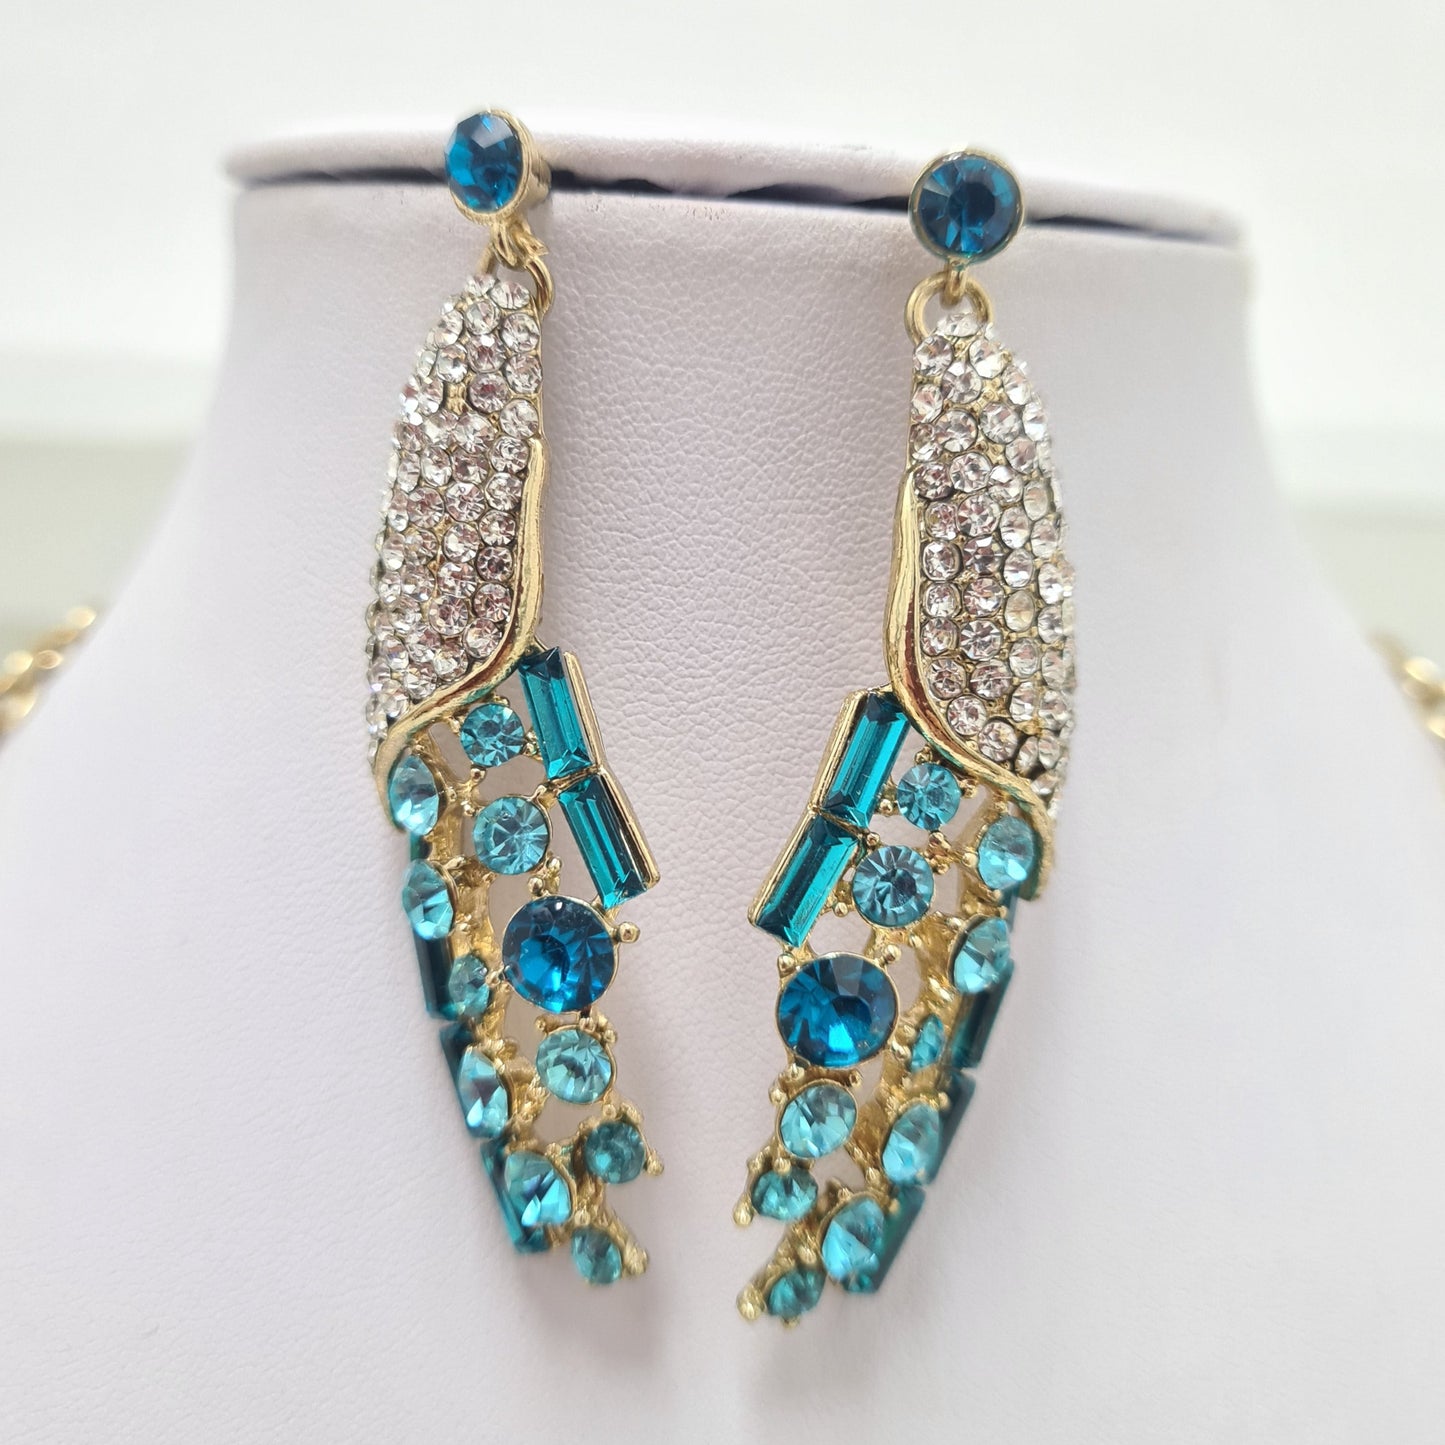 Blue and Silver Rhinestone Necklace Set